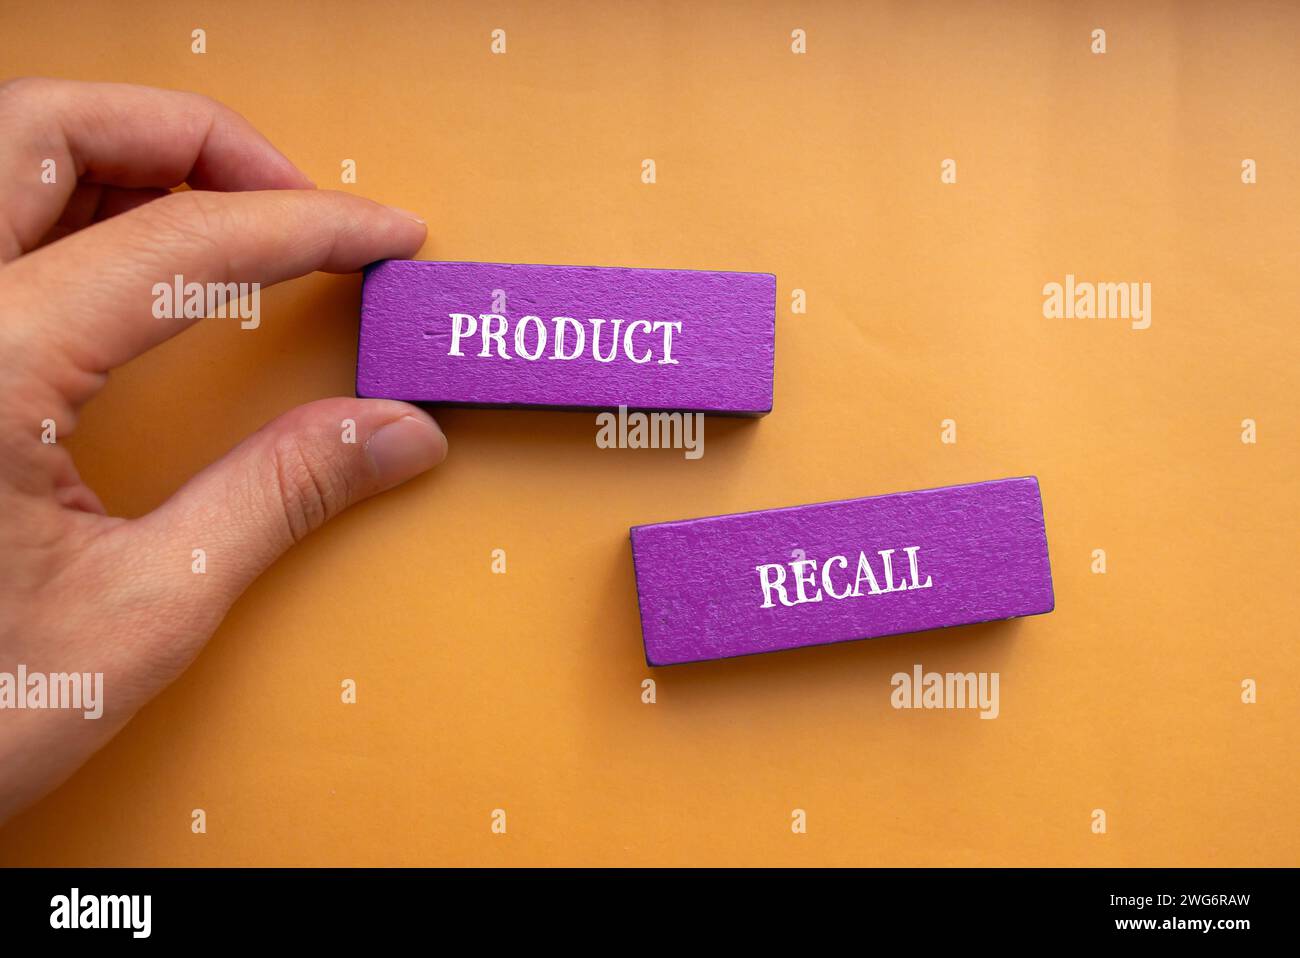 Product recall lettering on wooden blocks with orange background. Conceptual business symbol. Top view, copy space. Stock Photo